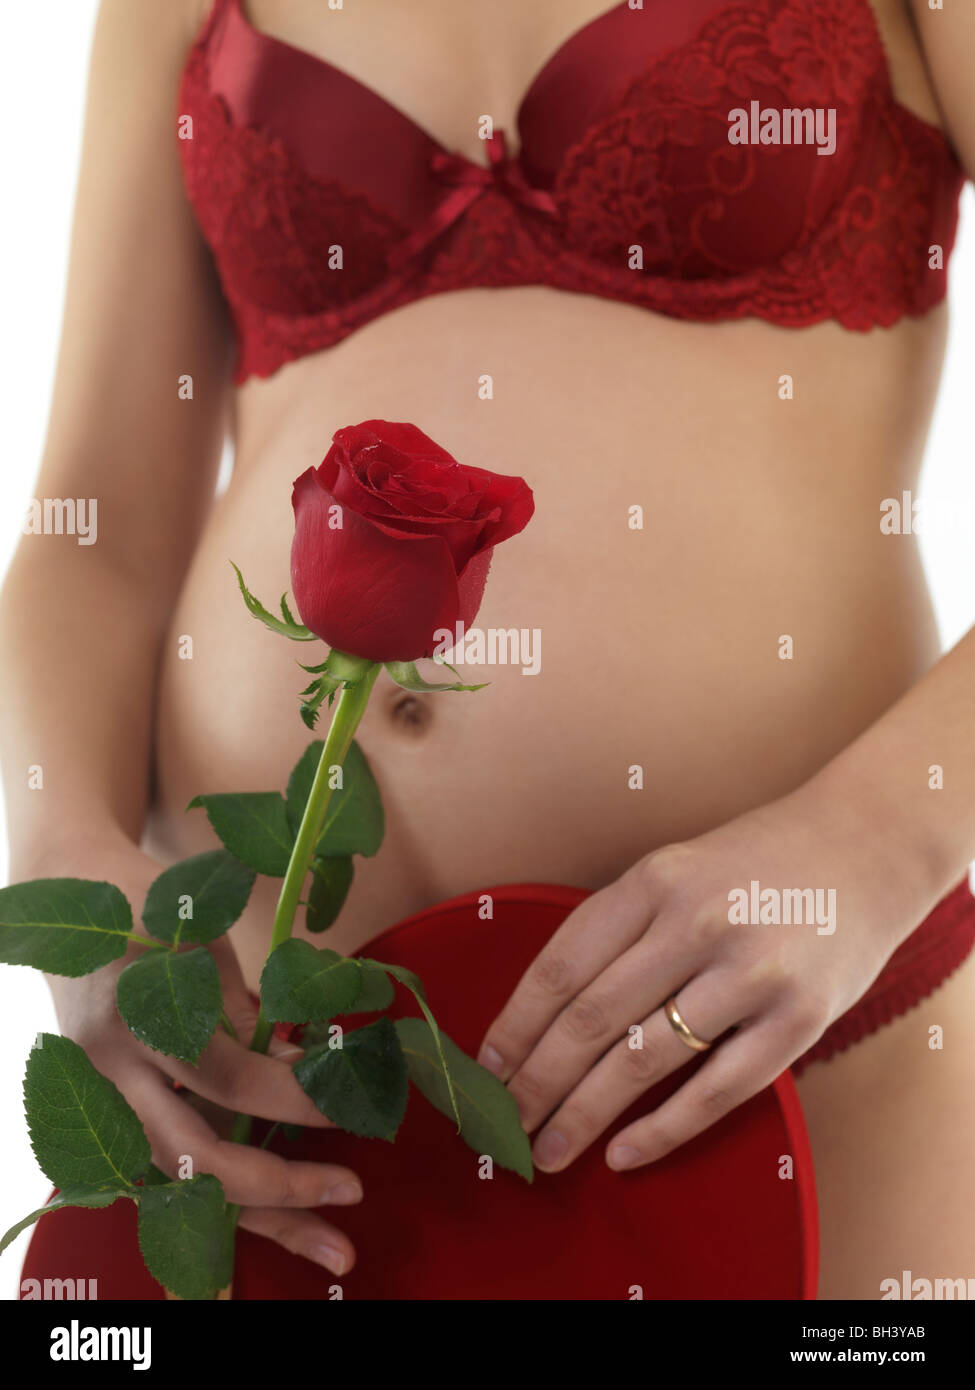 Pregnant woman with a red rose and a gift in her hands Stock Photo